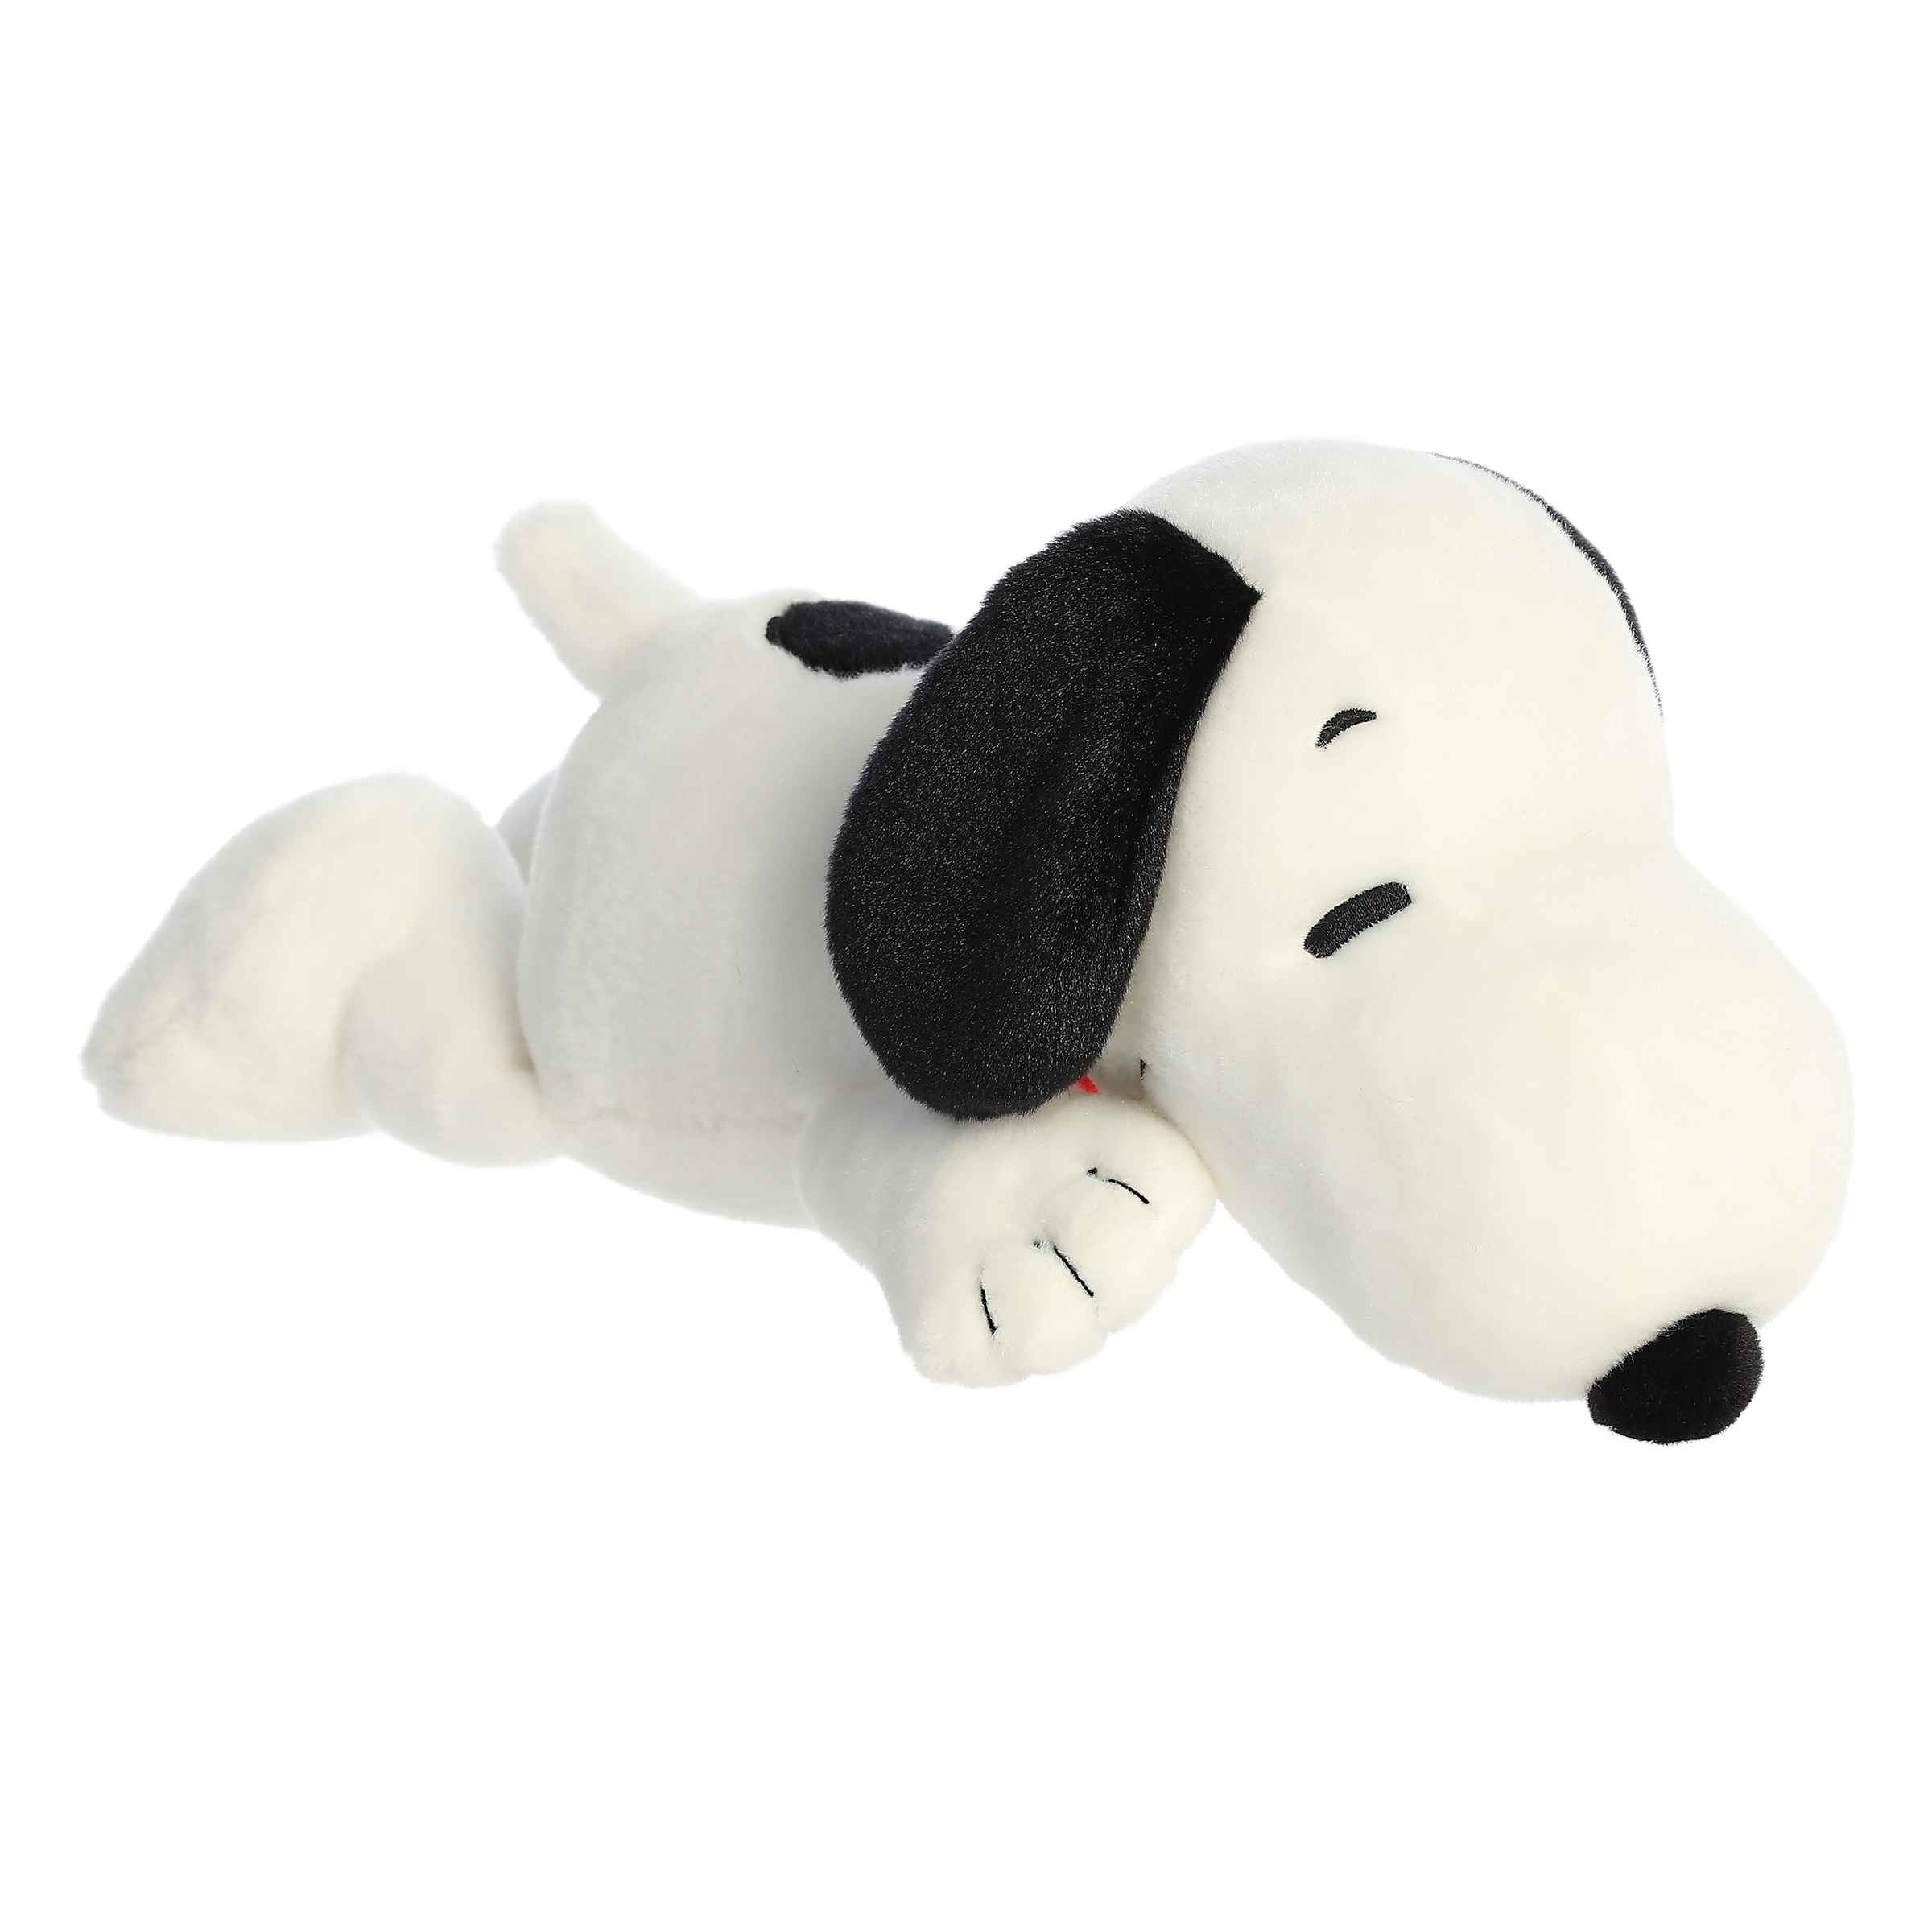 Floppy laying Snoopy plush by Peanuts and Aurora, with signature black ears and red collar